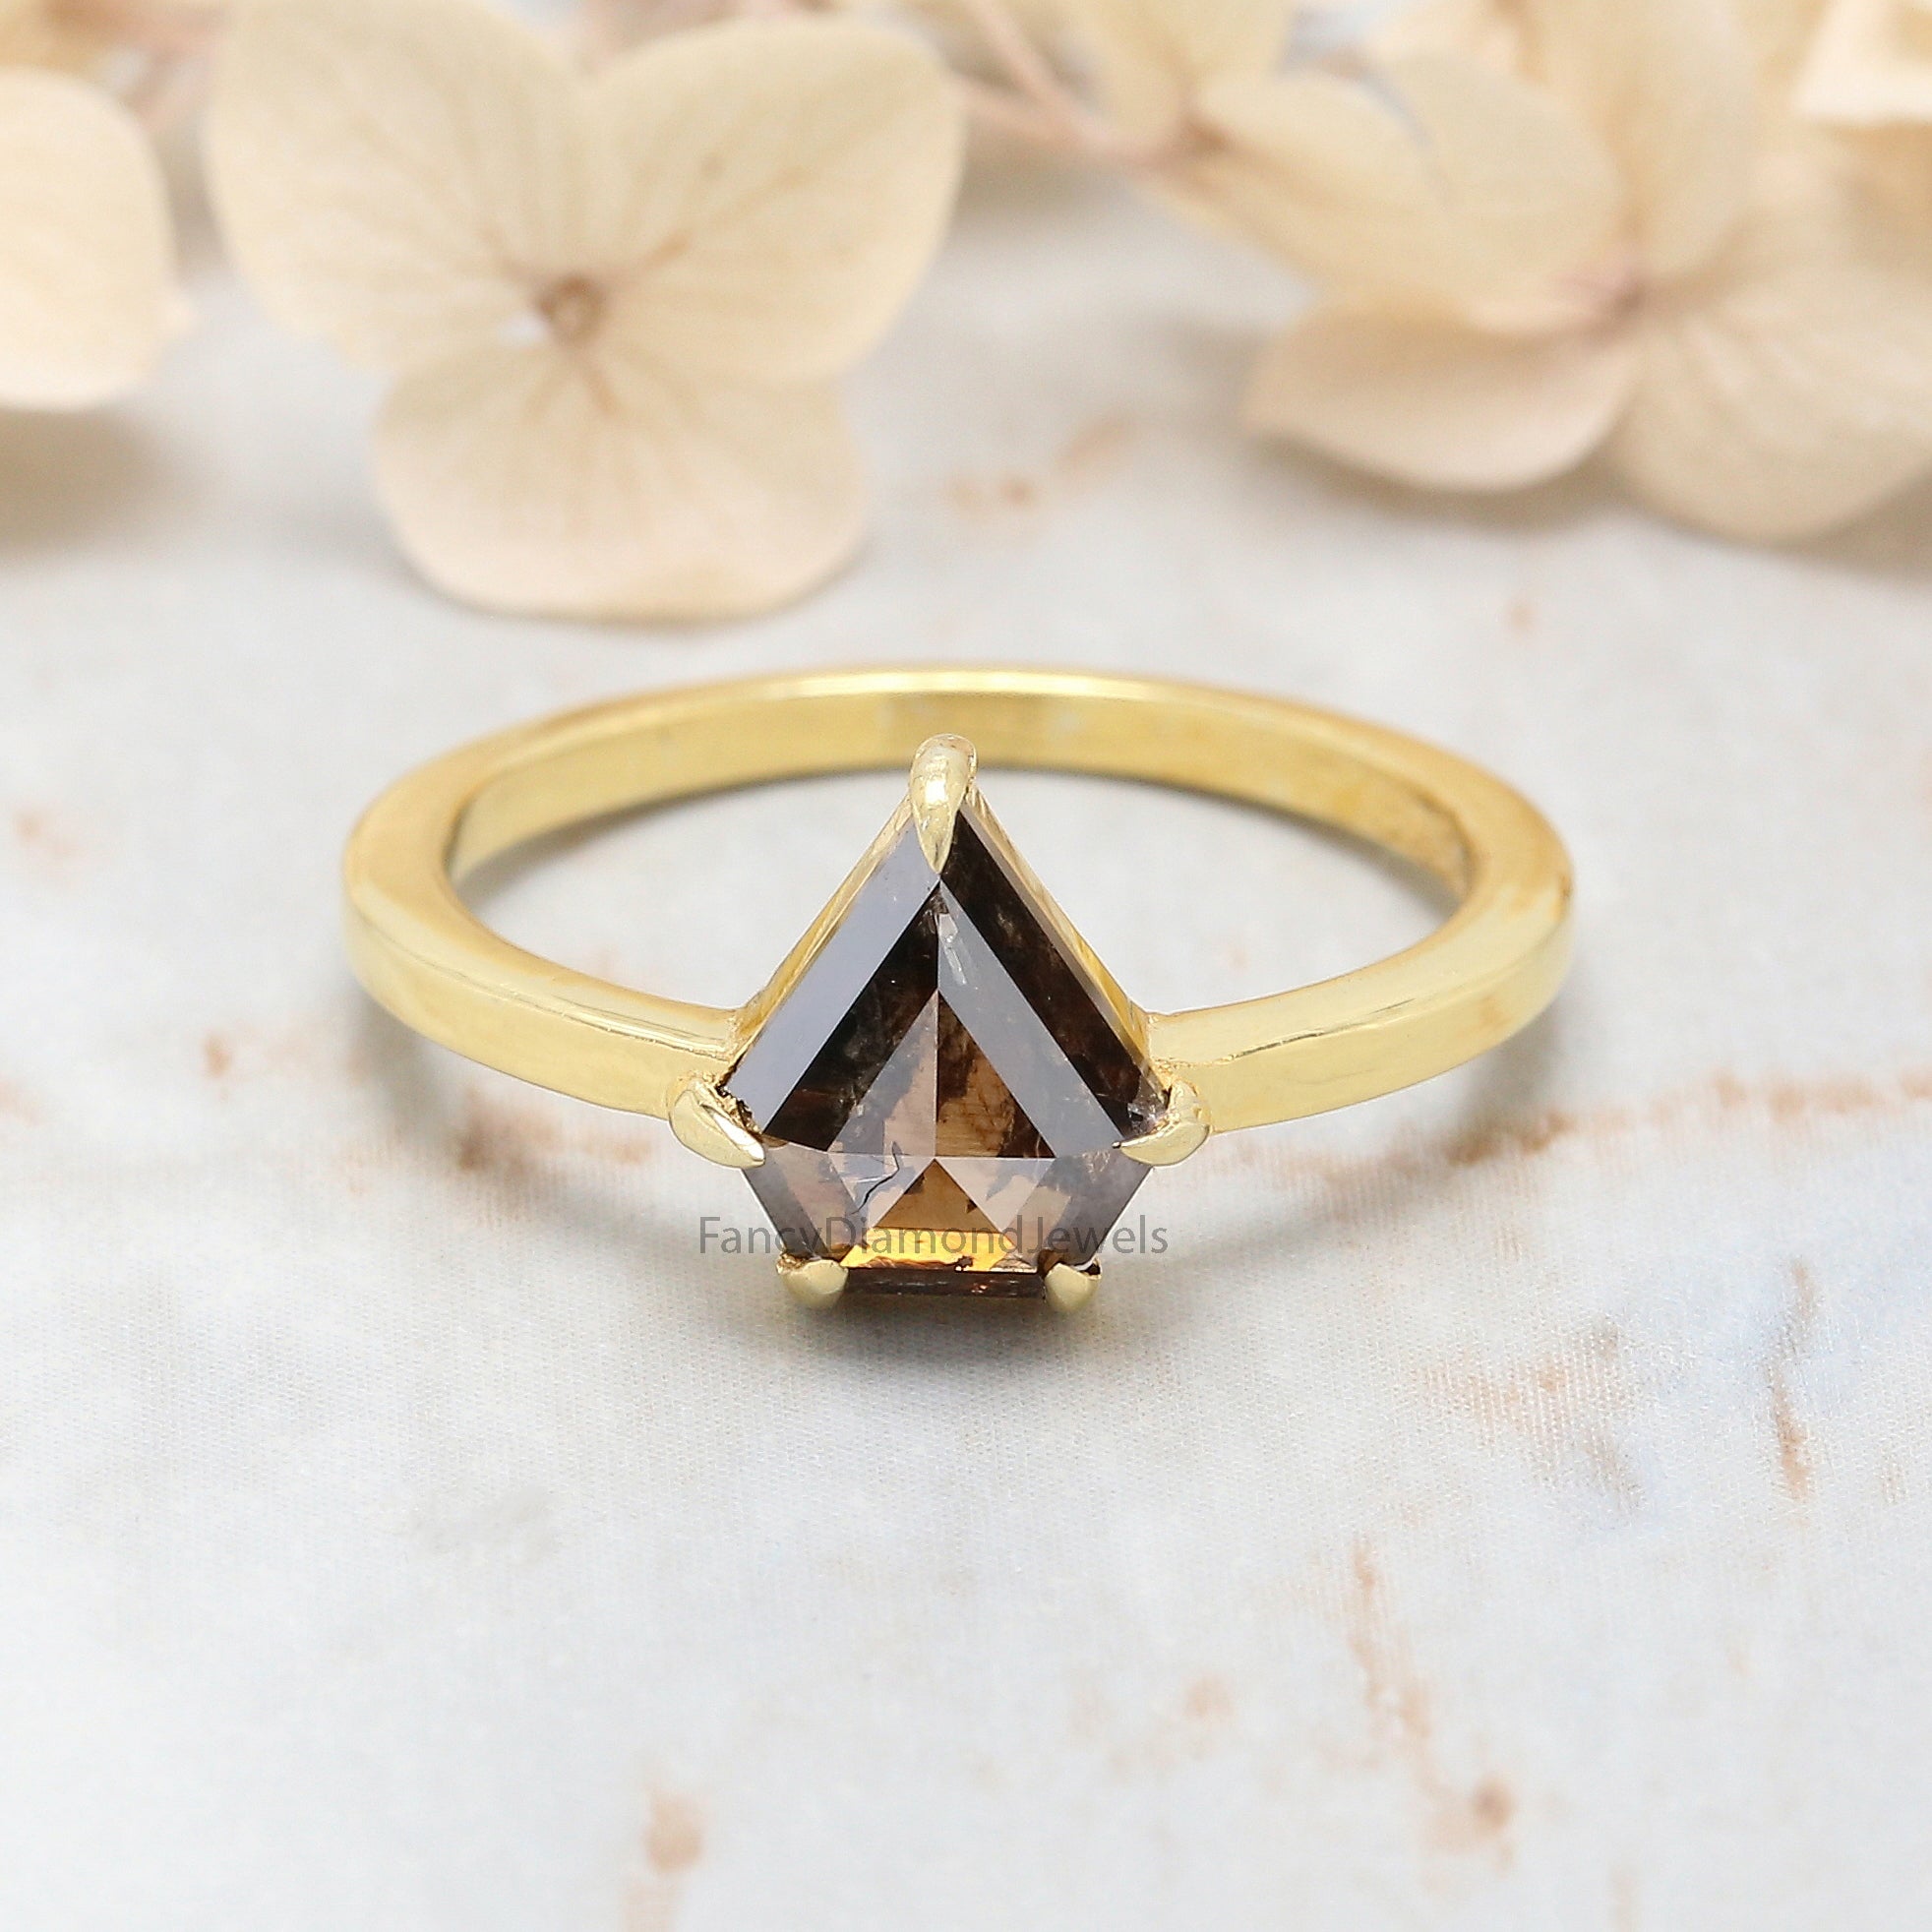 Shield Brown Color Diamond Ring 1.39 Ct 8.60 MM Shield Cut Diamond Ring 14K Solid Yellow Gold Silver Engagement Ring Gift For Her QN8853